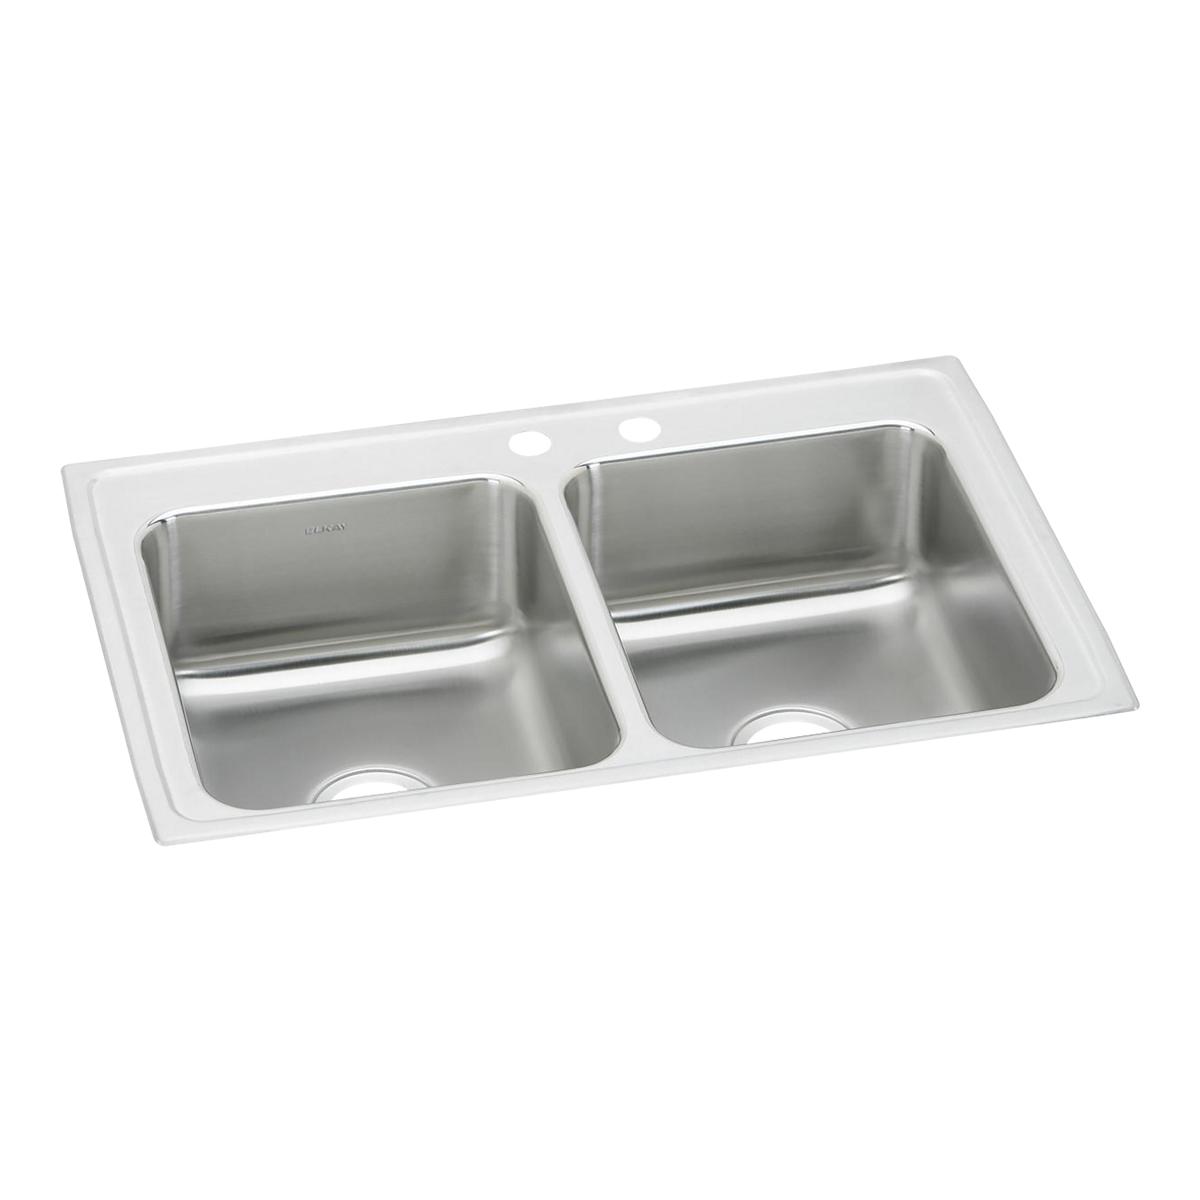 Elkay Lustertone Classic 33" x 21-1/4" x 7-7/8" MR2-Hole Equal Double Bowl Drop-in Sink